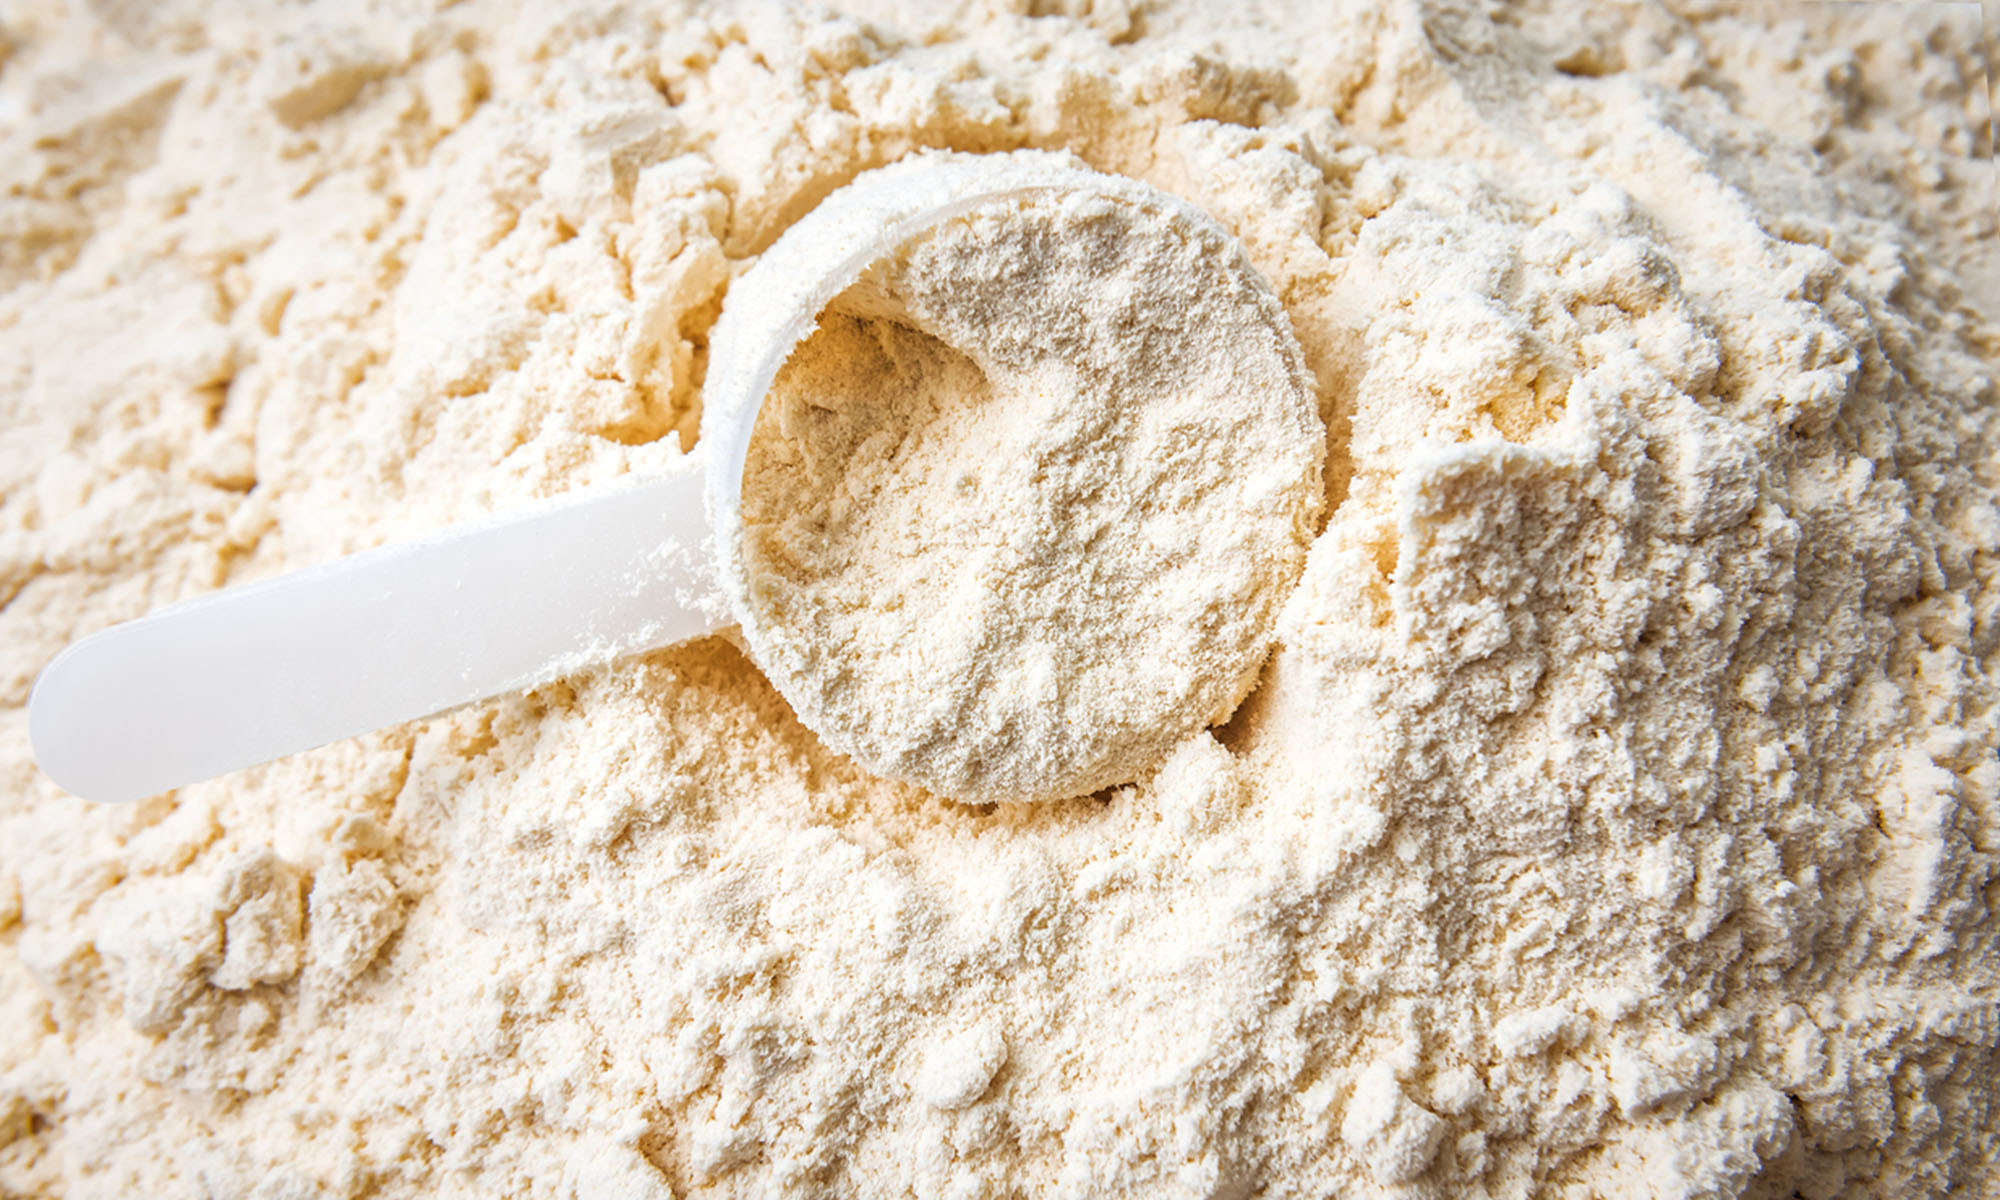 This Type Of Protein Powder May Lower Blood Pressure & Reduce Appetite